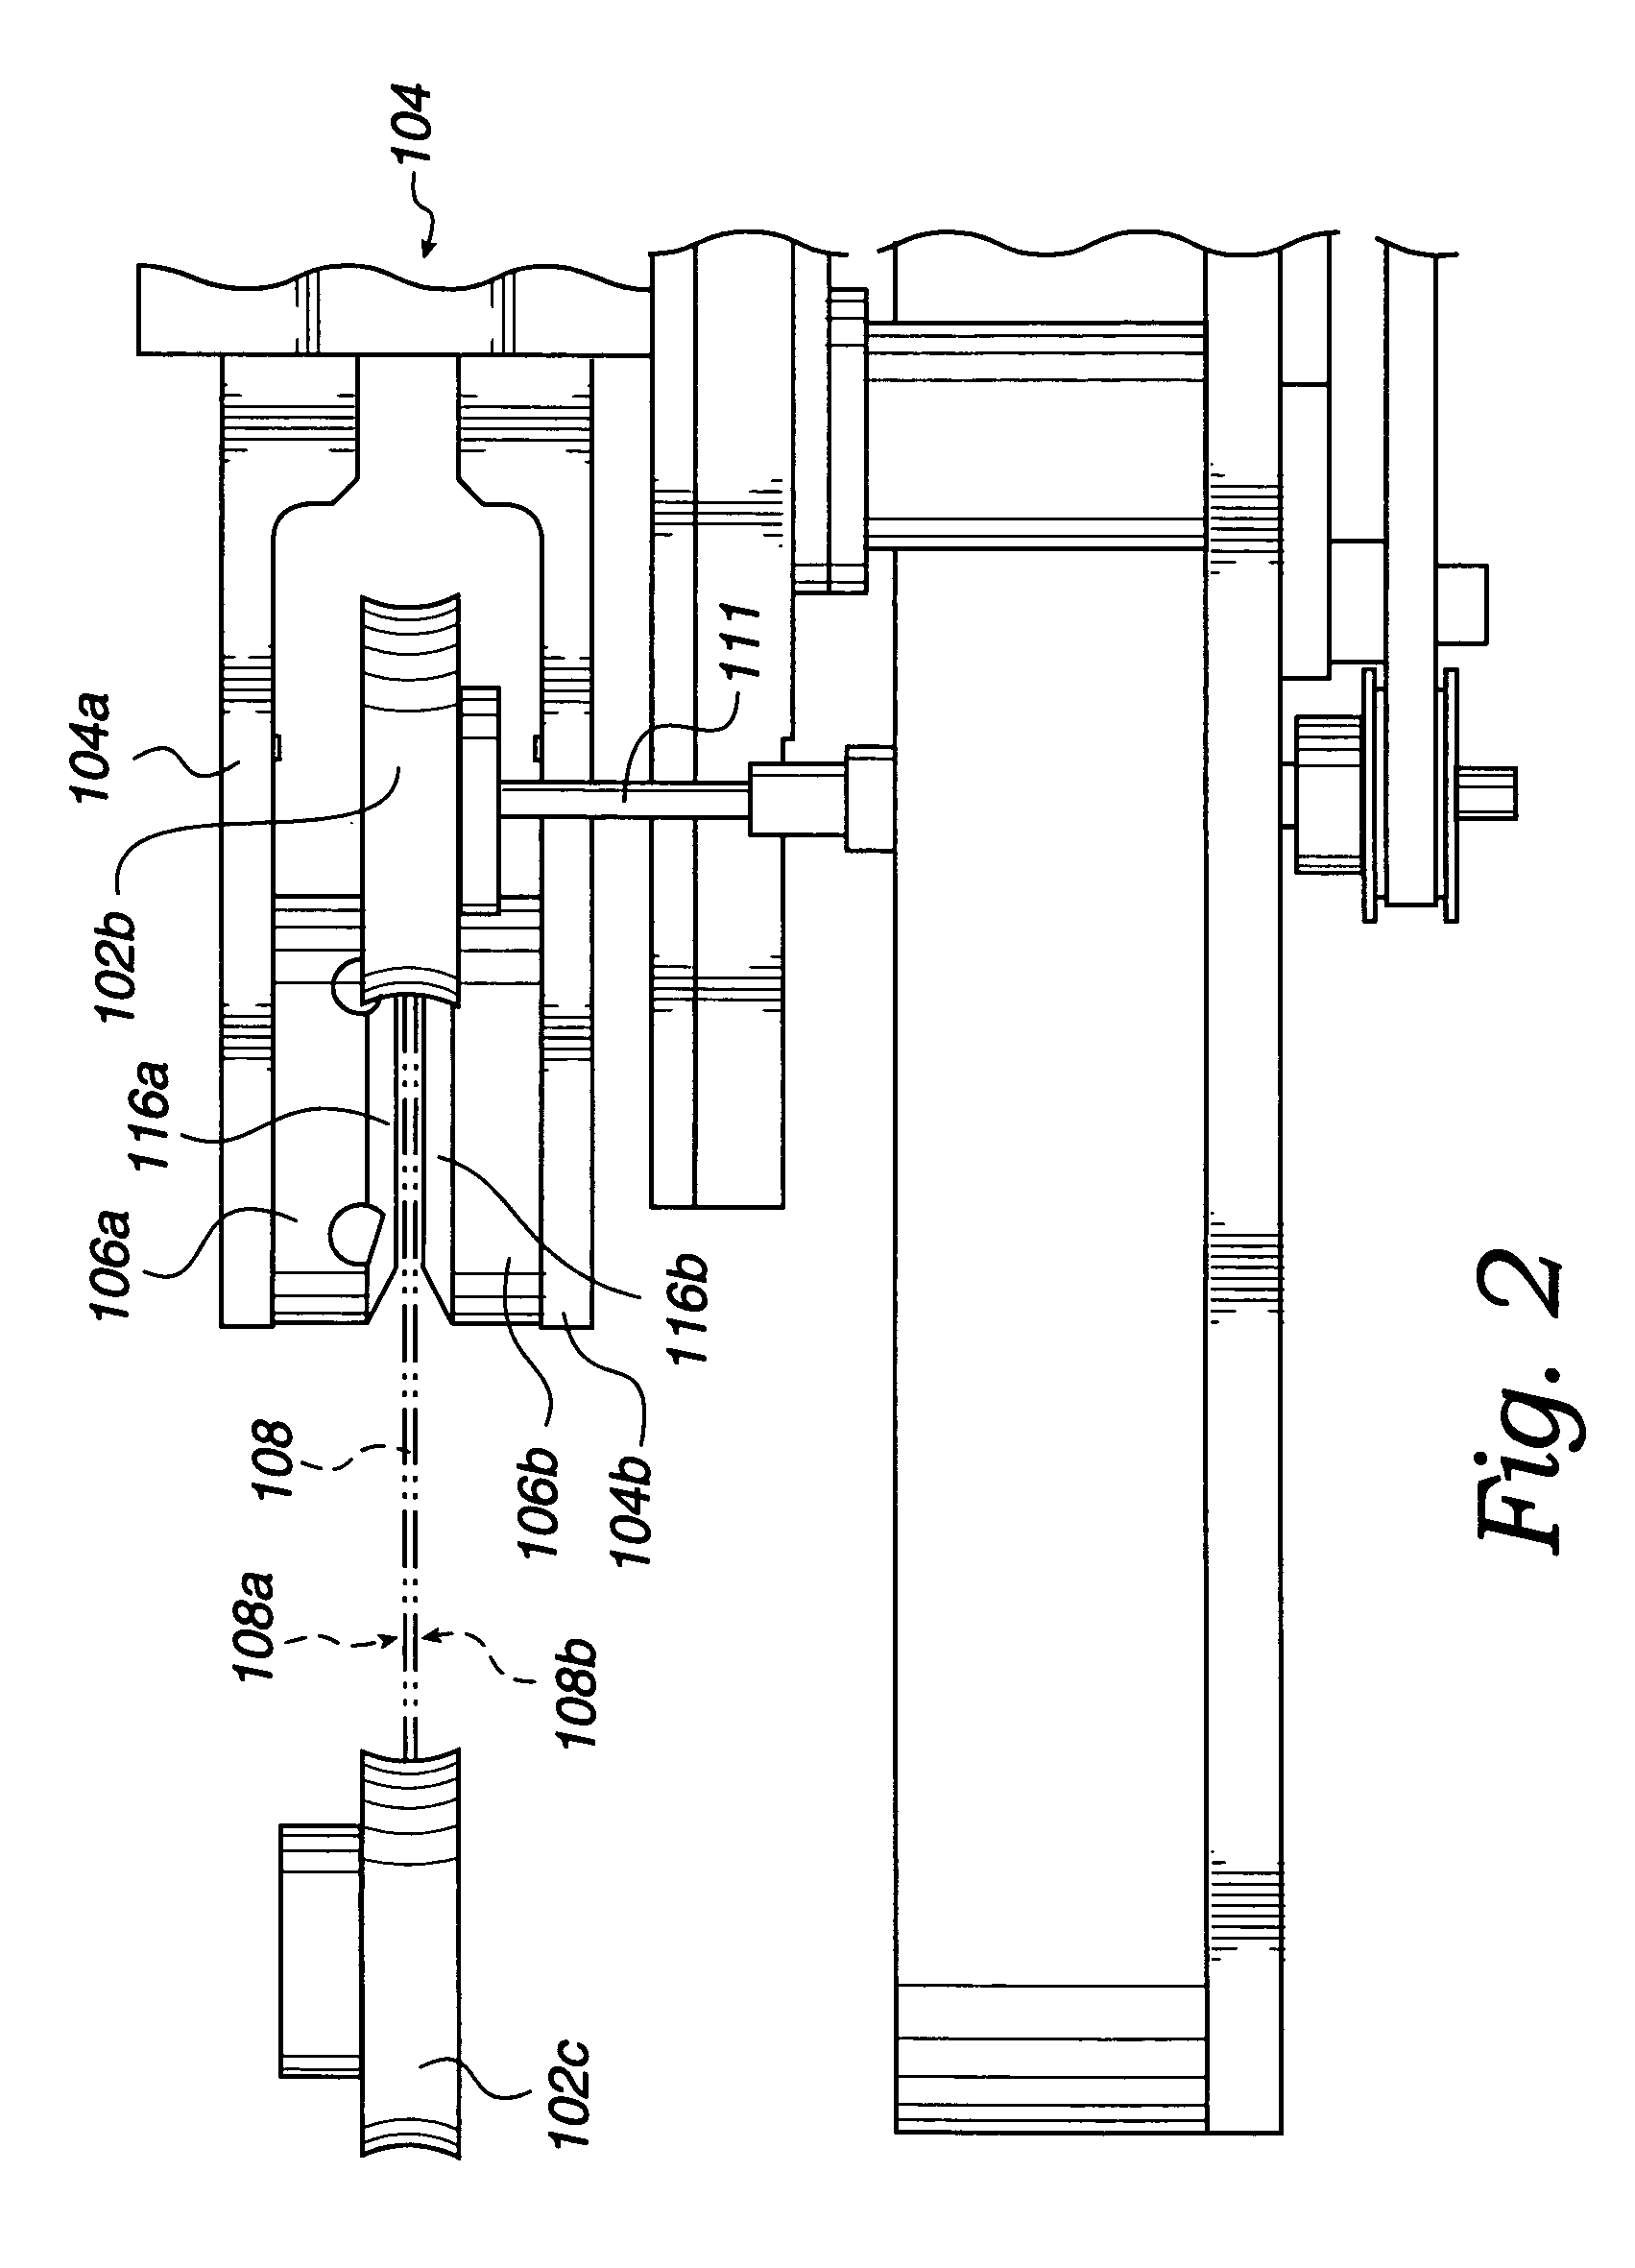 System method and apparatus for dry-in, dry-out, low defect laser dicing using proximity technology